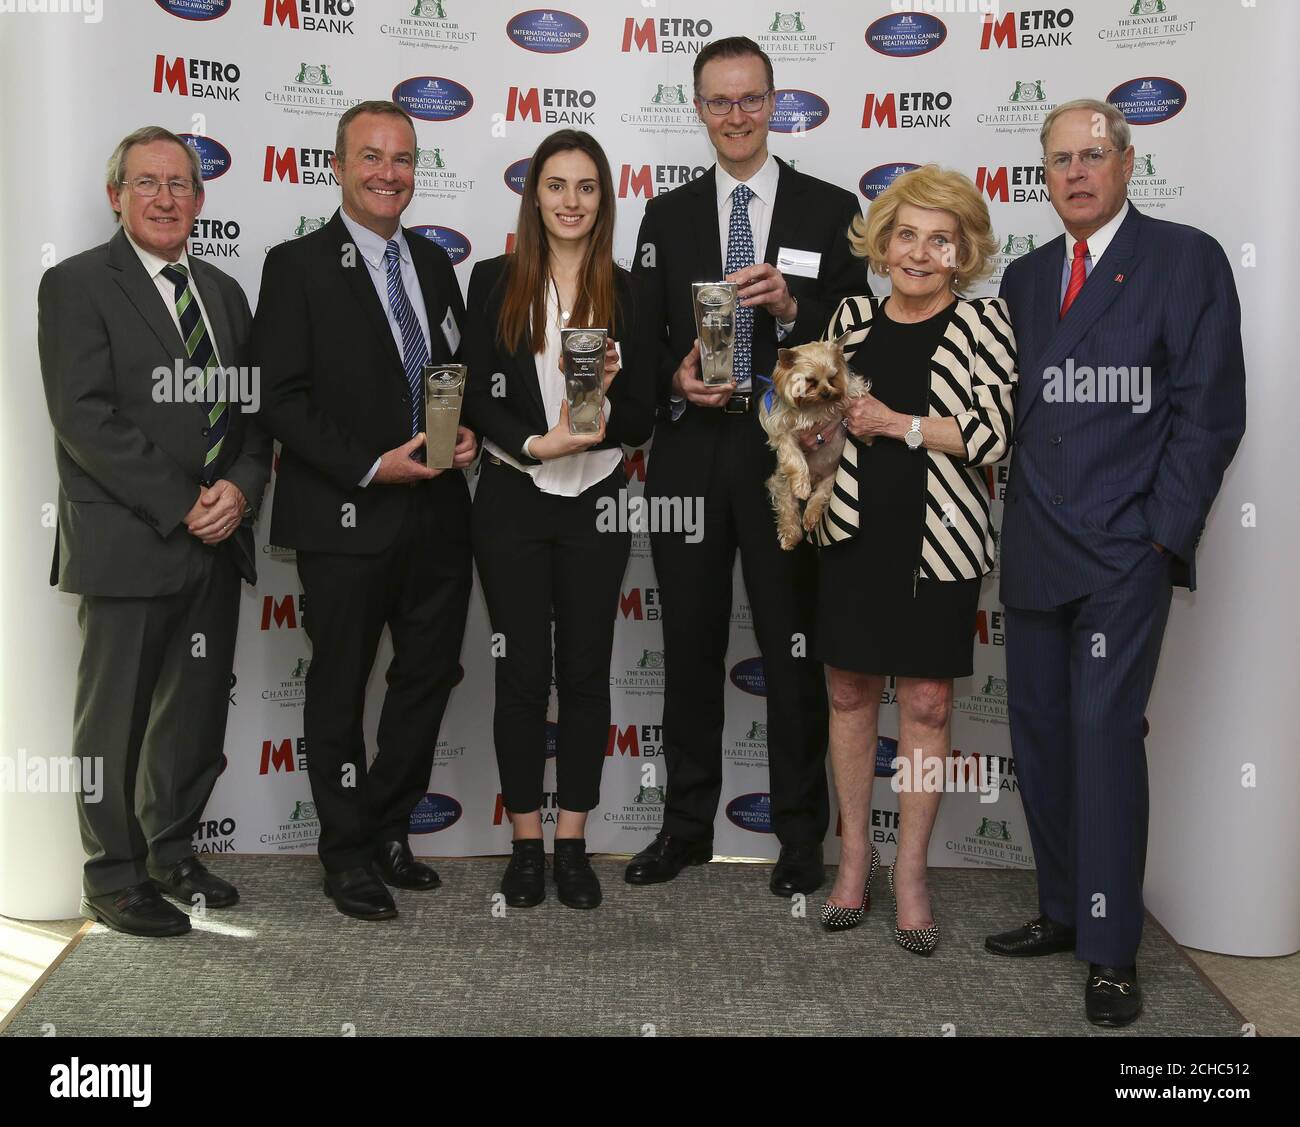 EDITORIAL USE ONLY (Left to right) Professor Steve Dean, Professor Paul McGreevy, who received the Lifetime Achievement award, Harriet Davenport, who received the Undergraduate Student Inspiration award and Professor Oliver Garden, who received the International award, with Metro Bank founder Vernon Hill (far right) his wife Shirley and their dog Sir Duffield during the Kennel Club's International Canine Health Awards 2017 at The Kennel Club, London.  Stock Photo